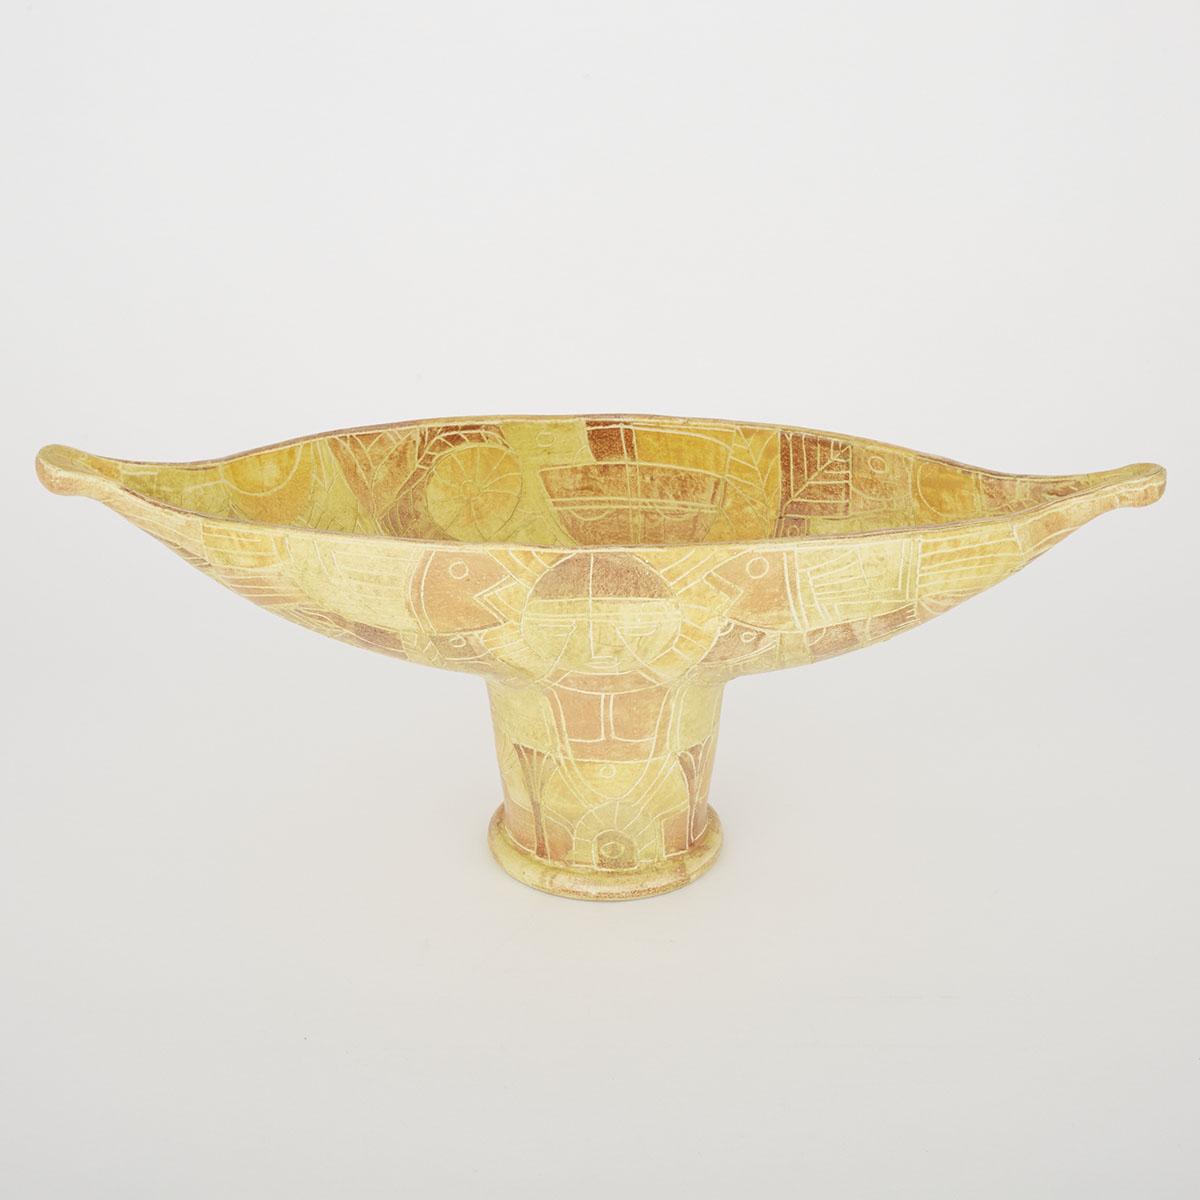 BROOKLIN POTTERY CENTREPIECE BOWL, THEO AND SUSAN HARLANDER, C.1975of canoe form on a cylinder - Bild 2 aus 4